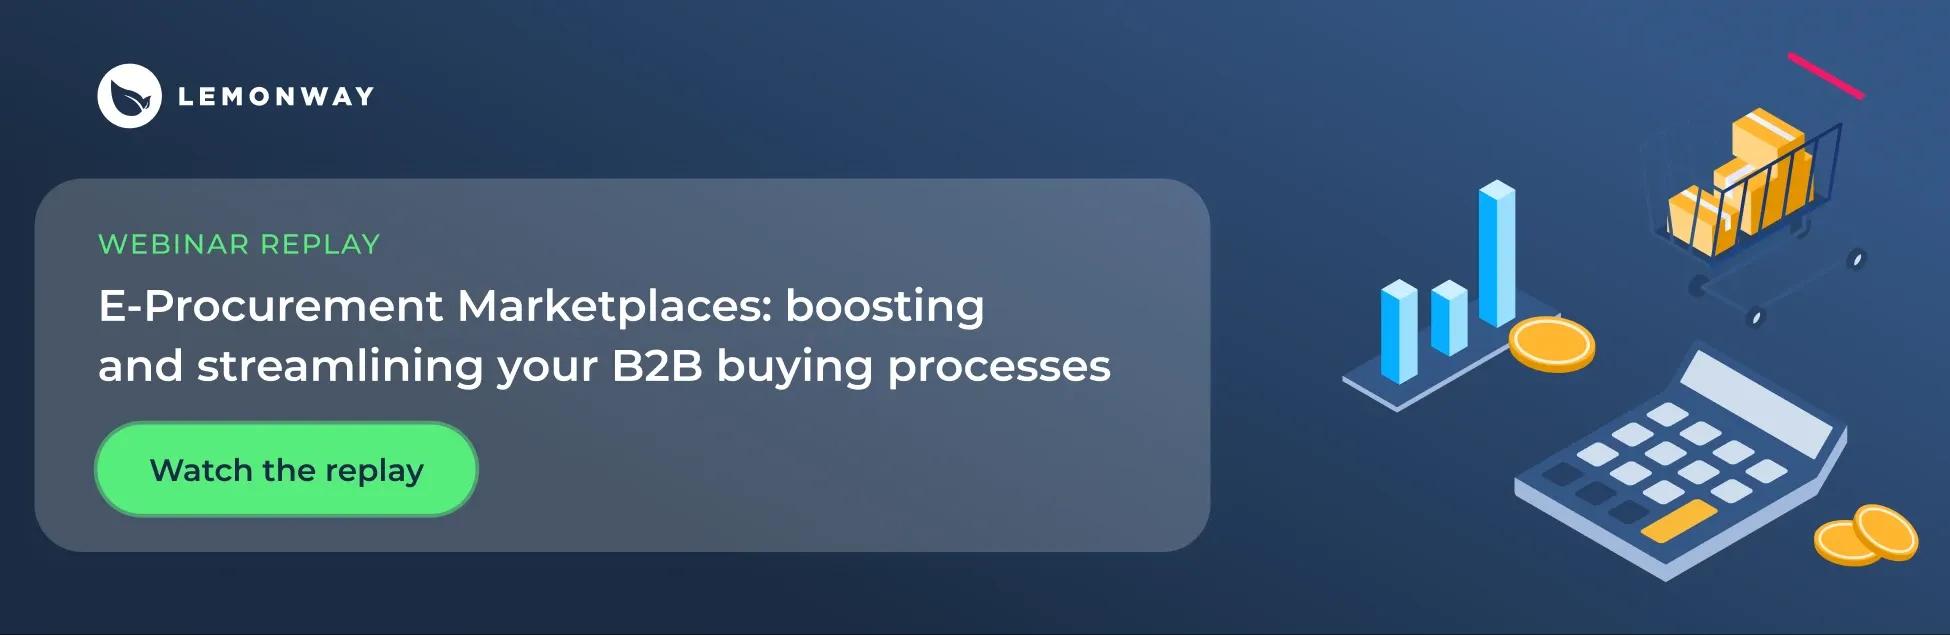 Webinar replay e-Procurement Marketplaces : boosting and streamlining your B2B buying processes